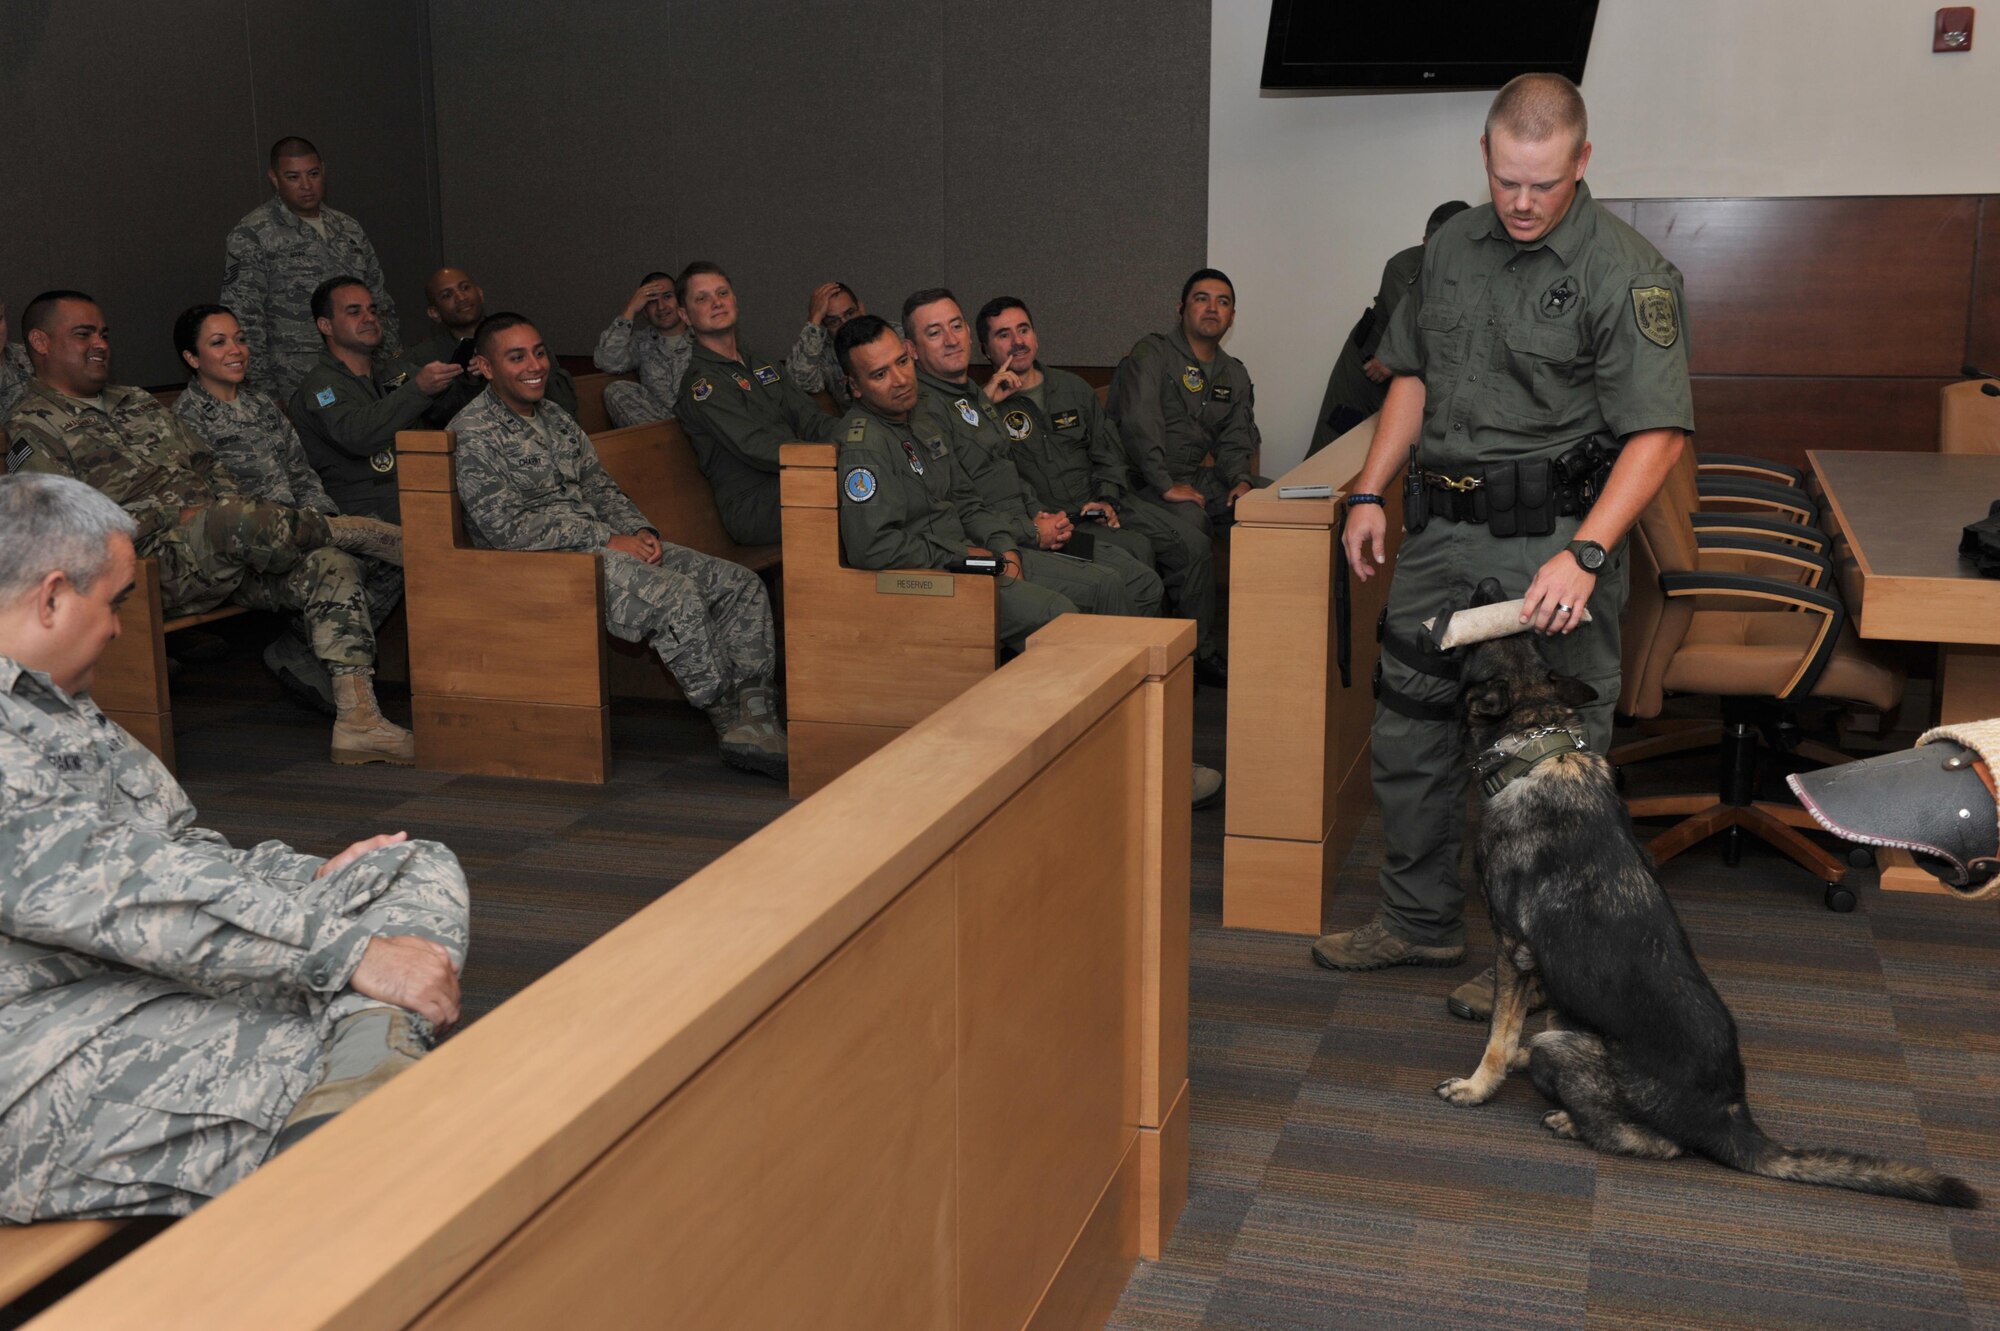 Derek York, an Okaloosa County K-9 team member, performs obedience drills with his working dog, Ranger, during the Building Partnership Aviation Capacity Seminar at Ft. Walton Beach, Fla., July 19, 2016. Approximately 40 guest speakers amd tour guides from across the Department of Defense, other government agencies and the civilia sector share their personal experiencies in aviations enterprise and security with BPACS attendees. (U.S. Air Force photo by Staff Sgt. Kentavist P. Brackin)